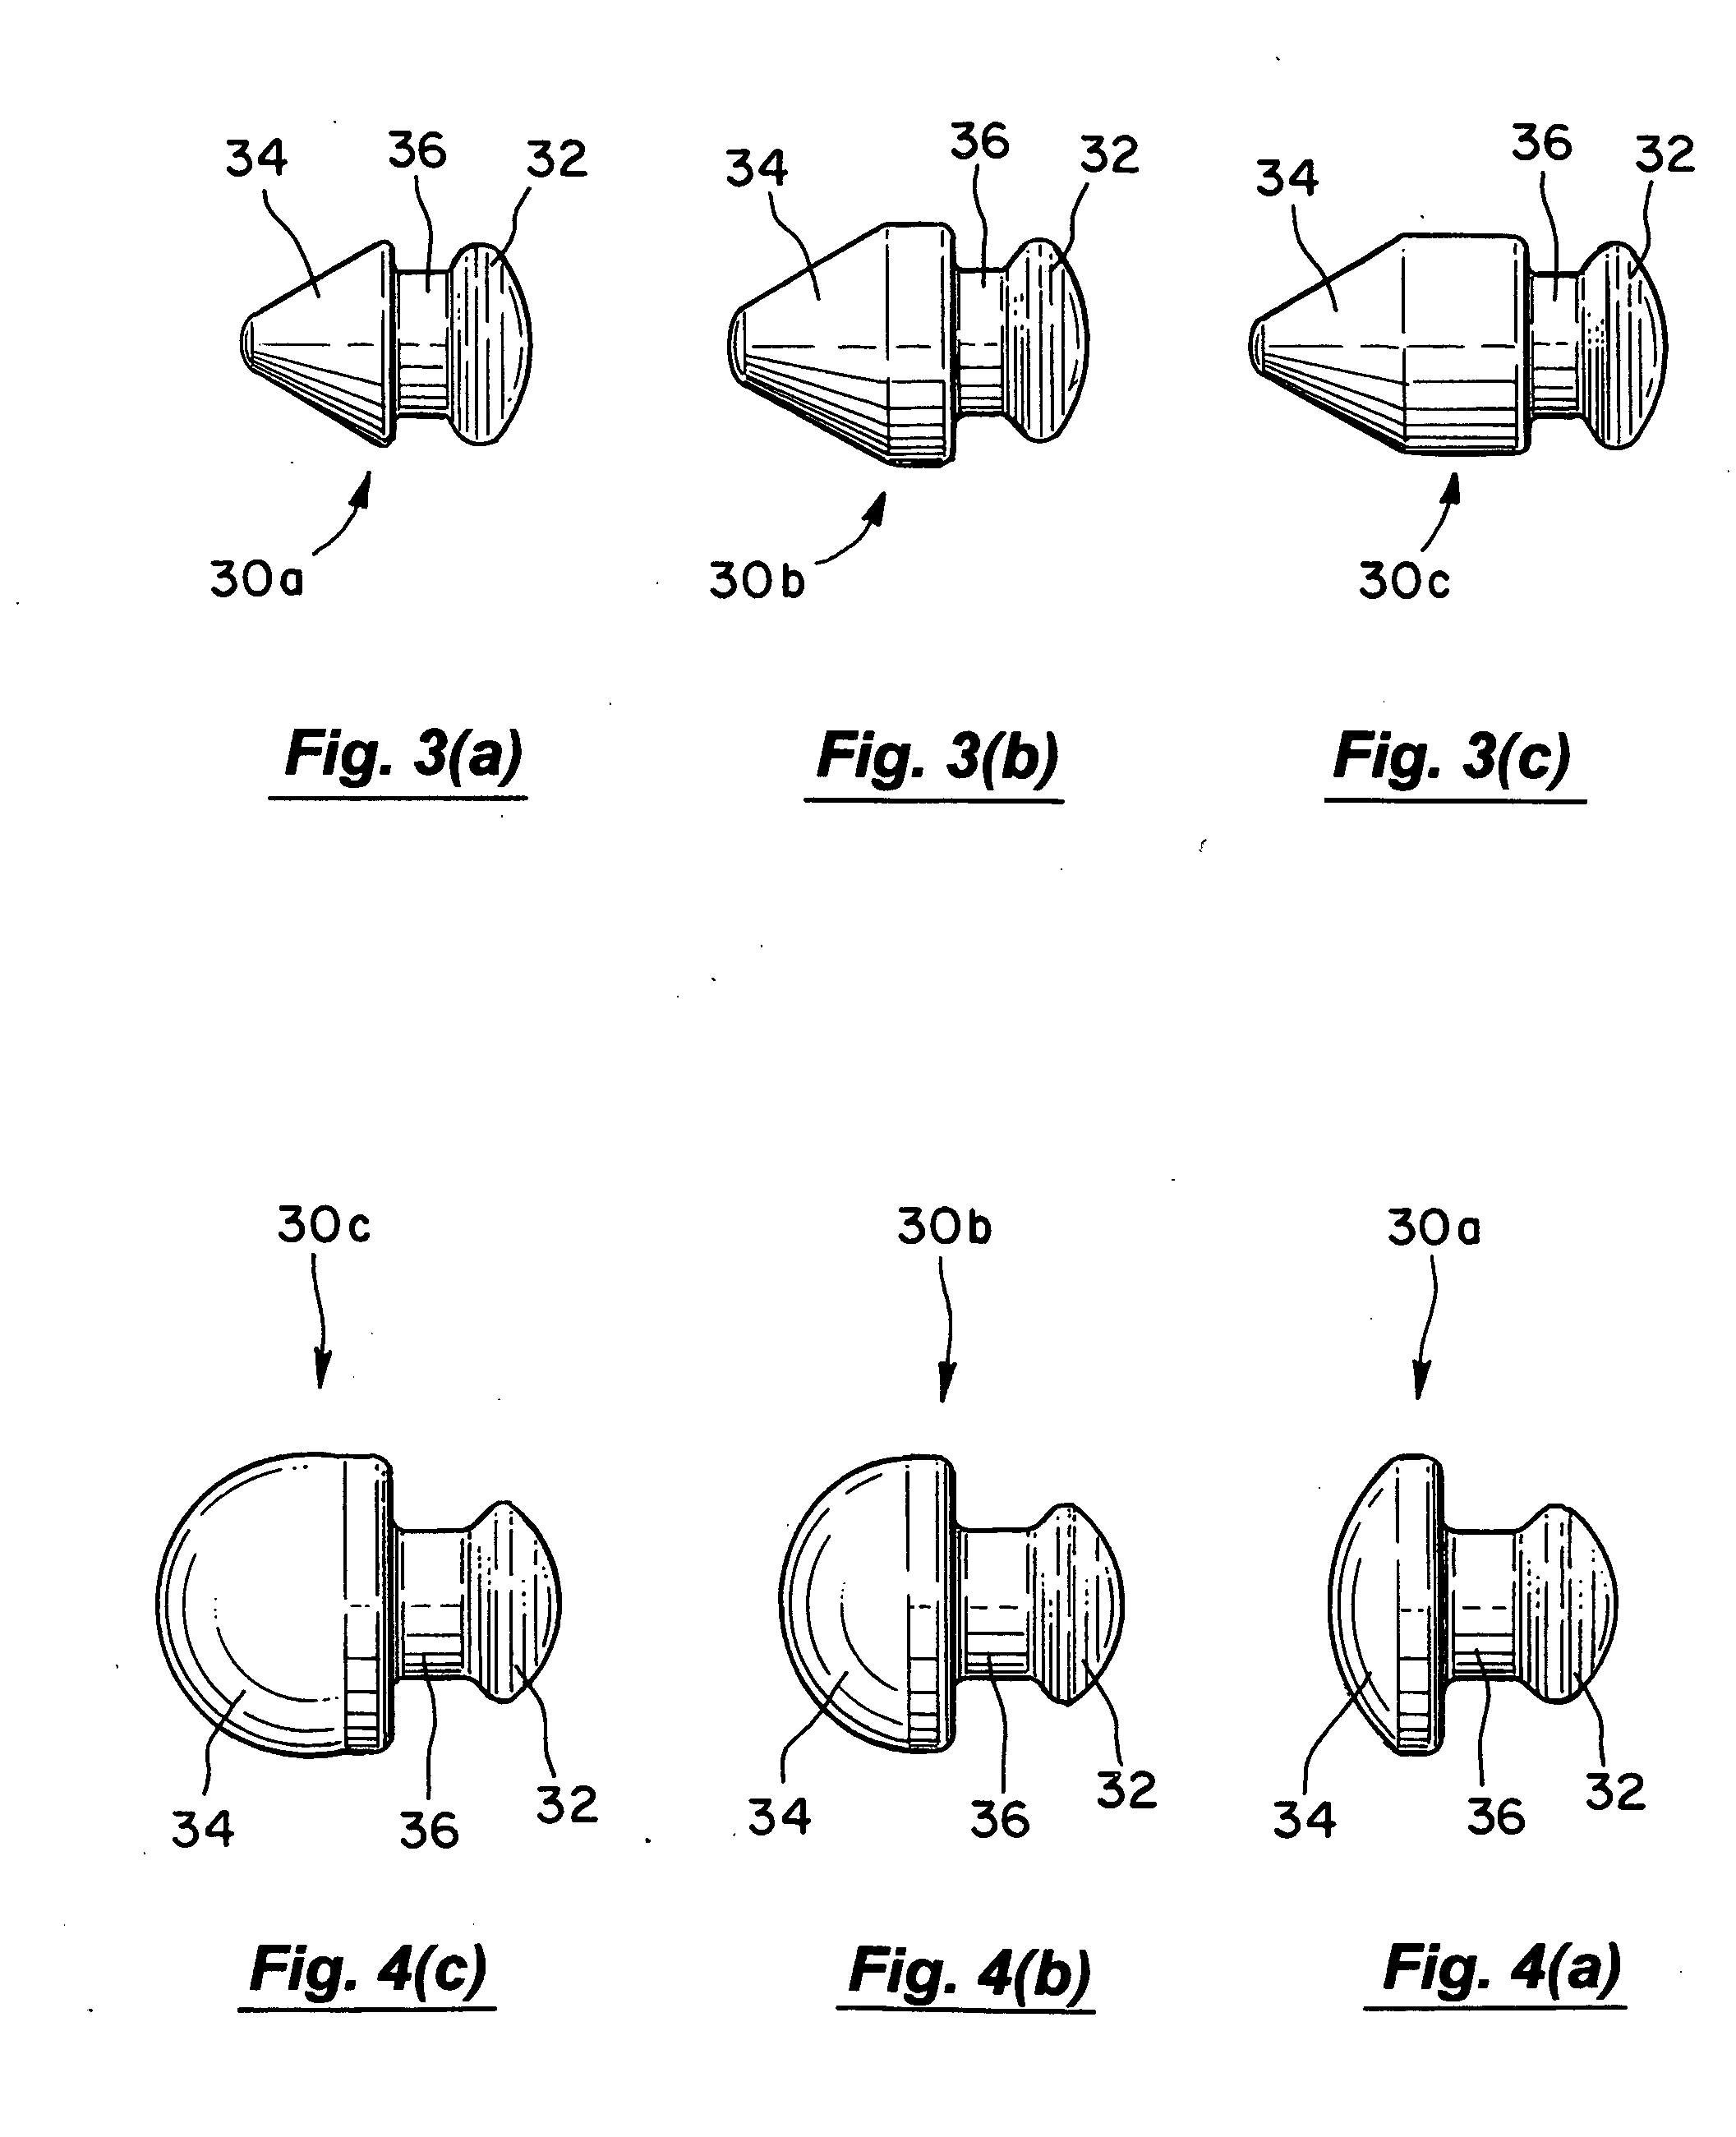 Automated method for producing improved orthodontic aligners